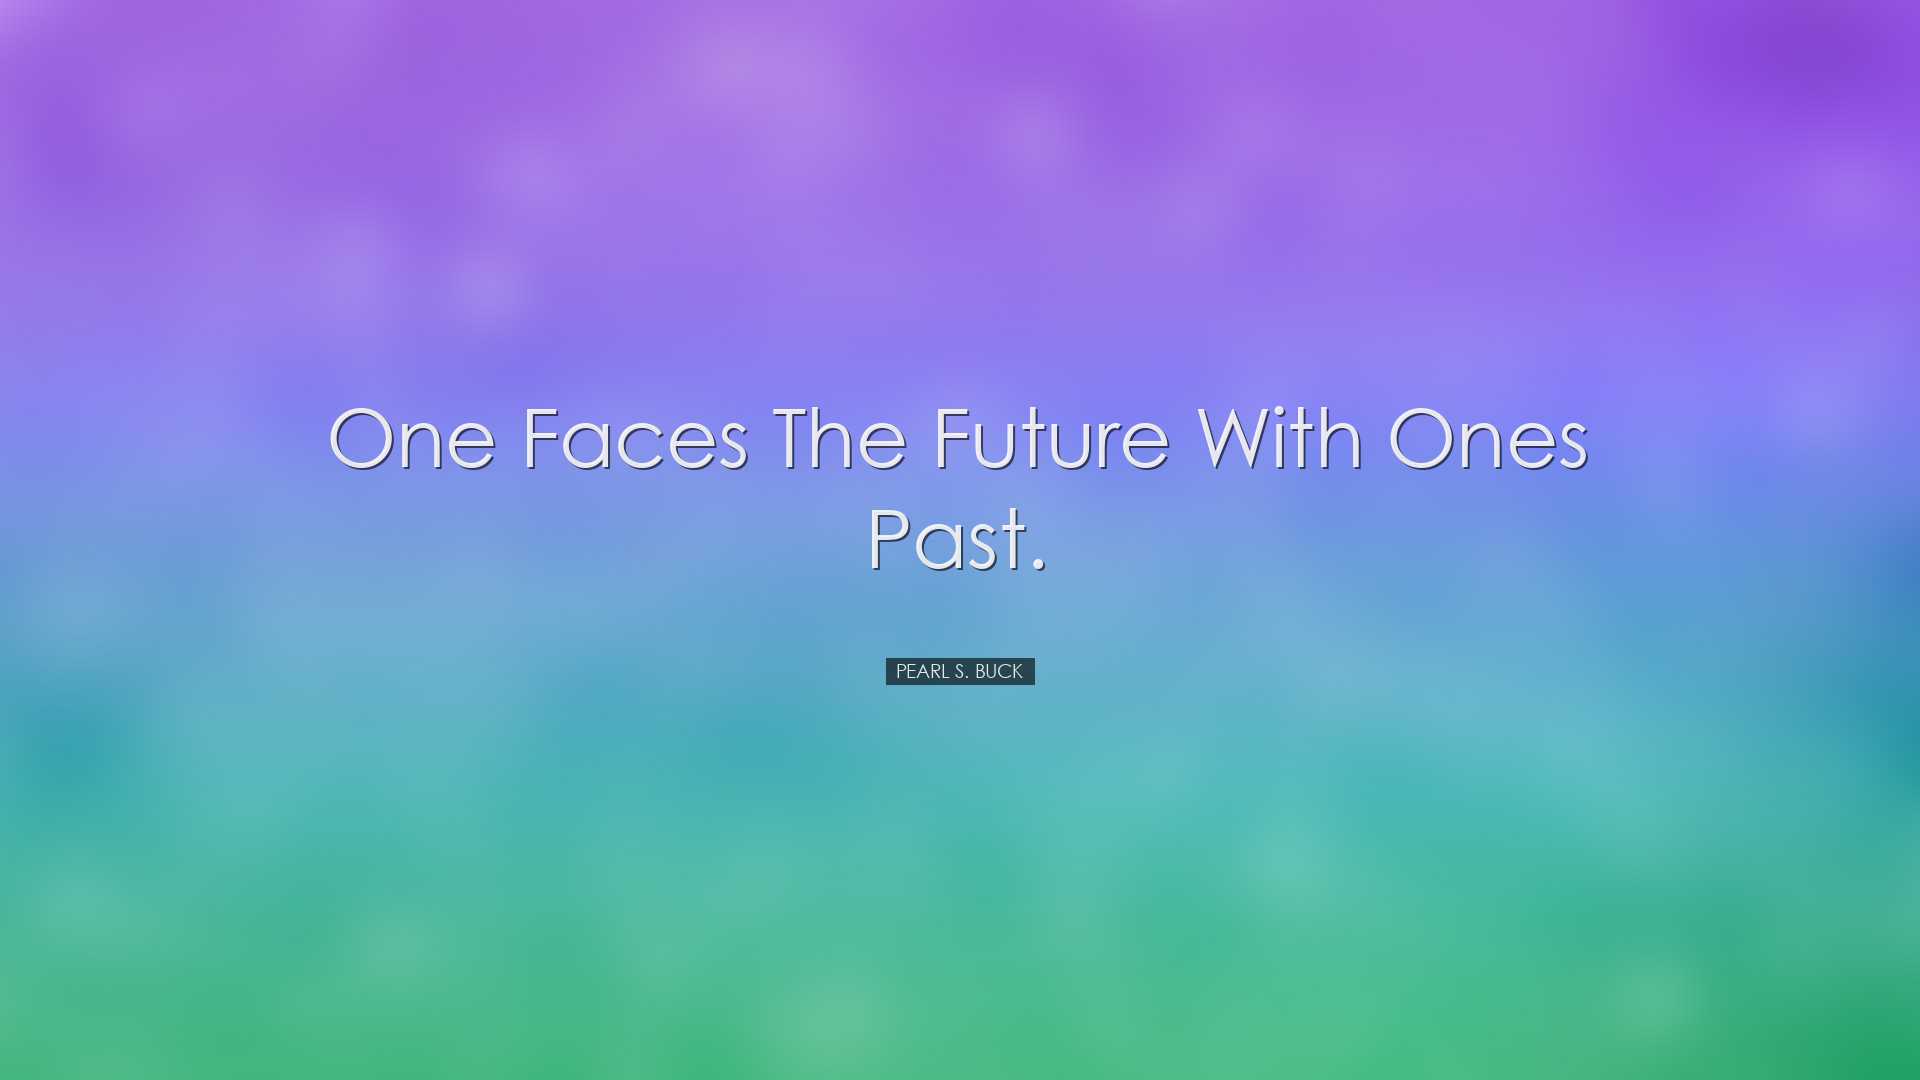 One faces the future with ones past. - Pearl S. Buck